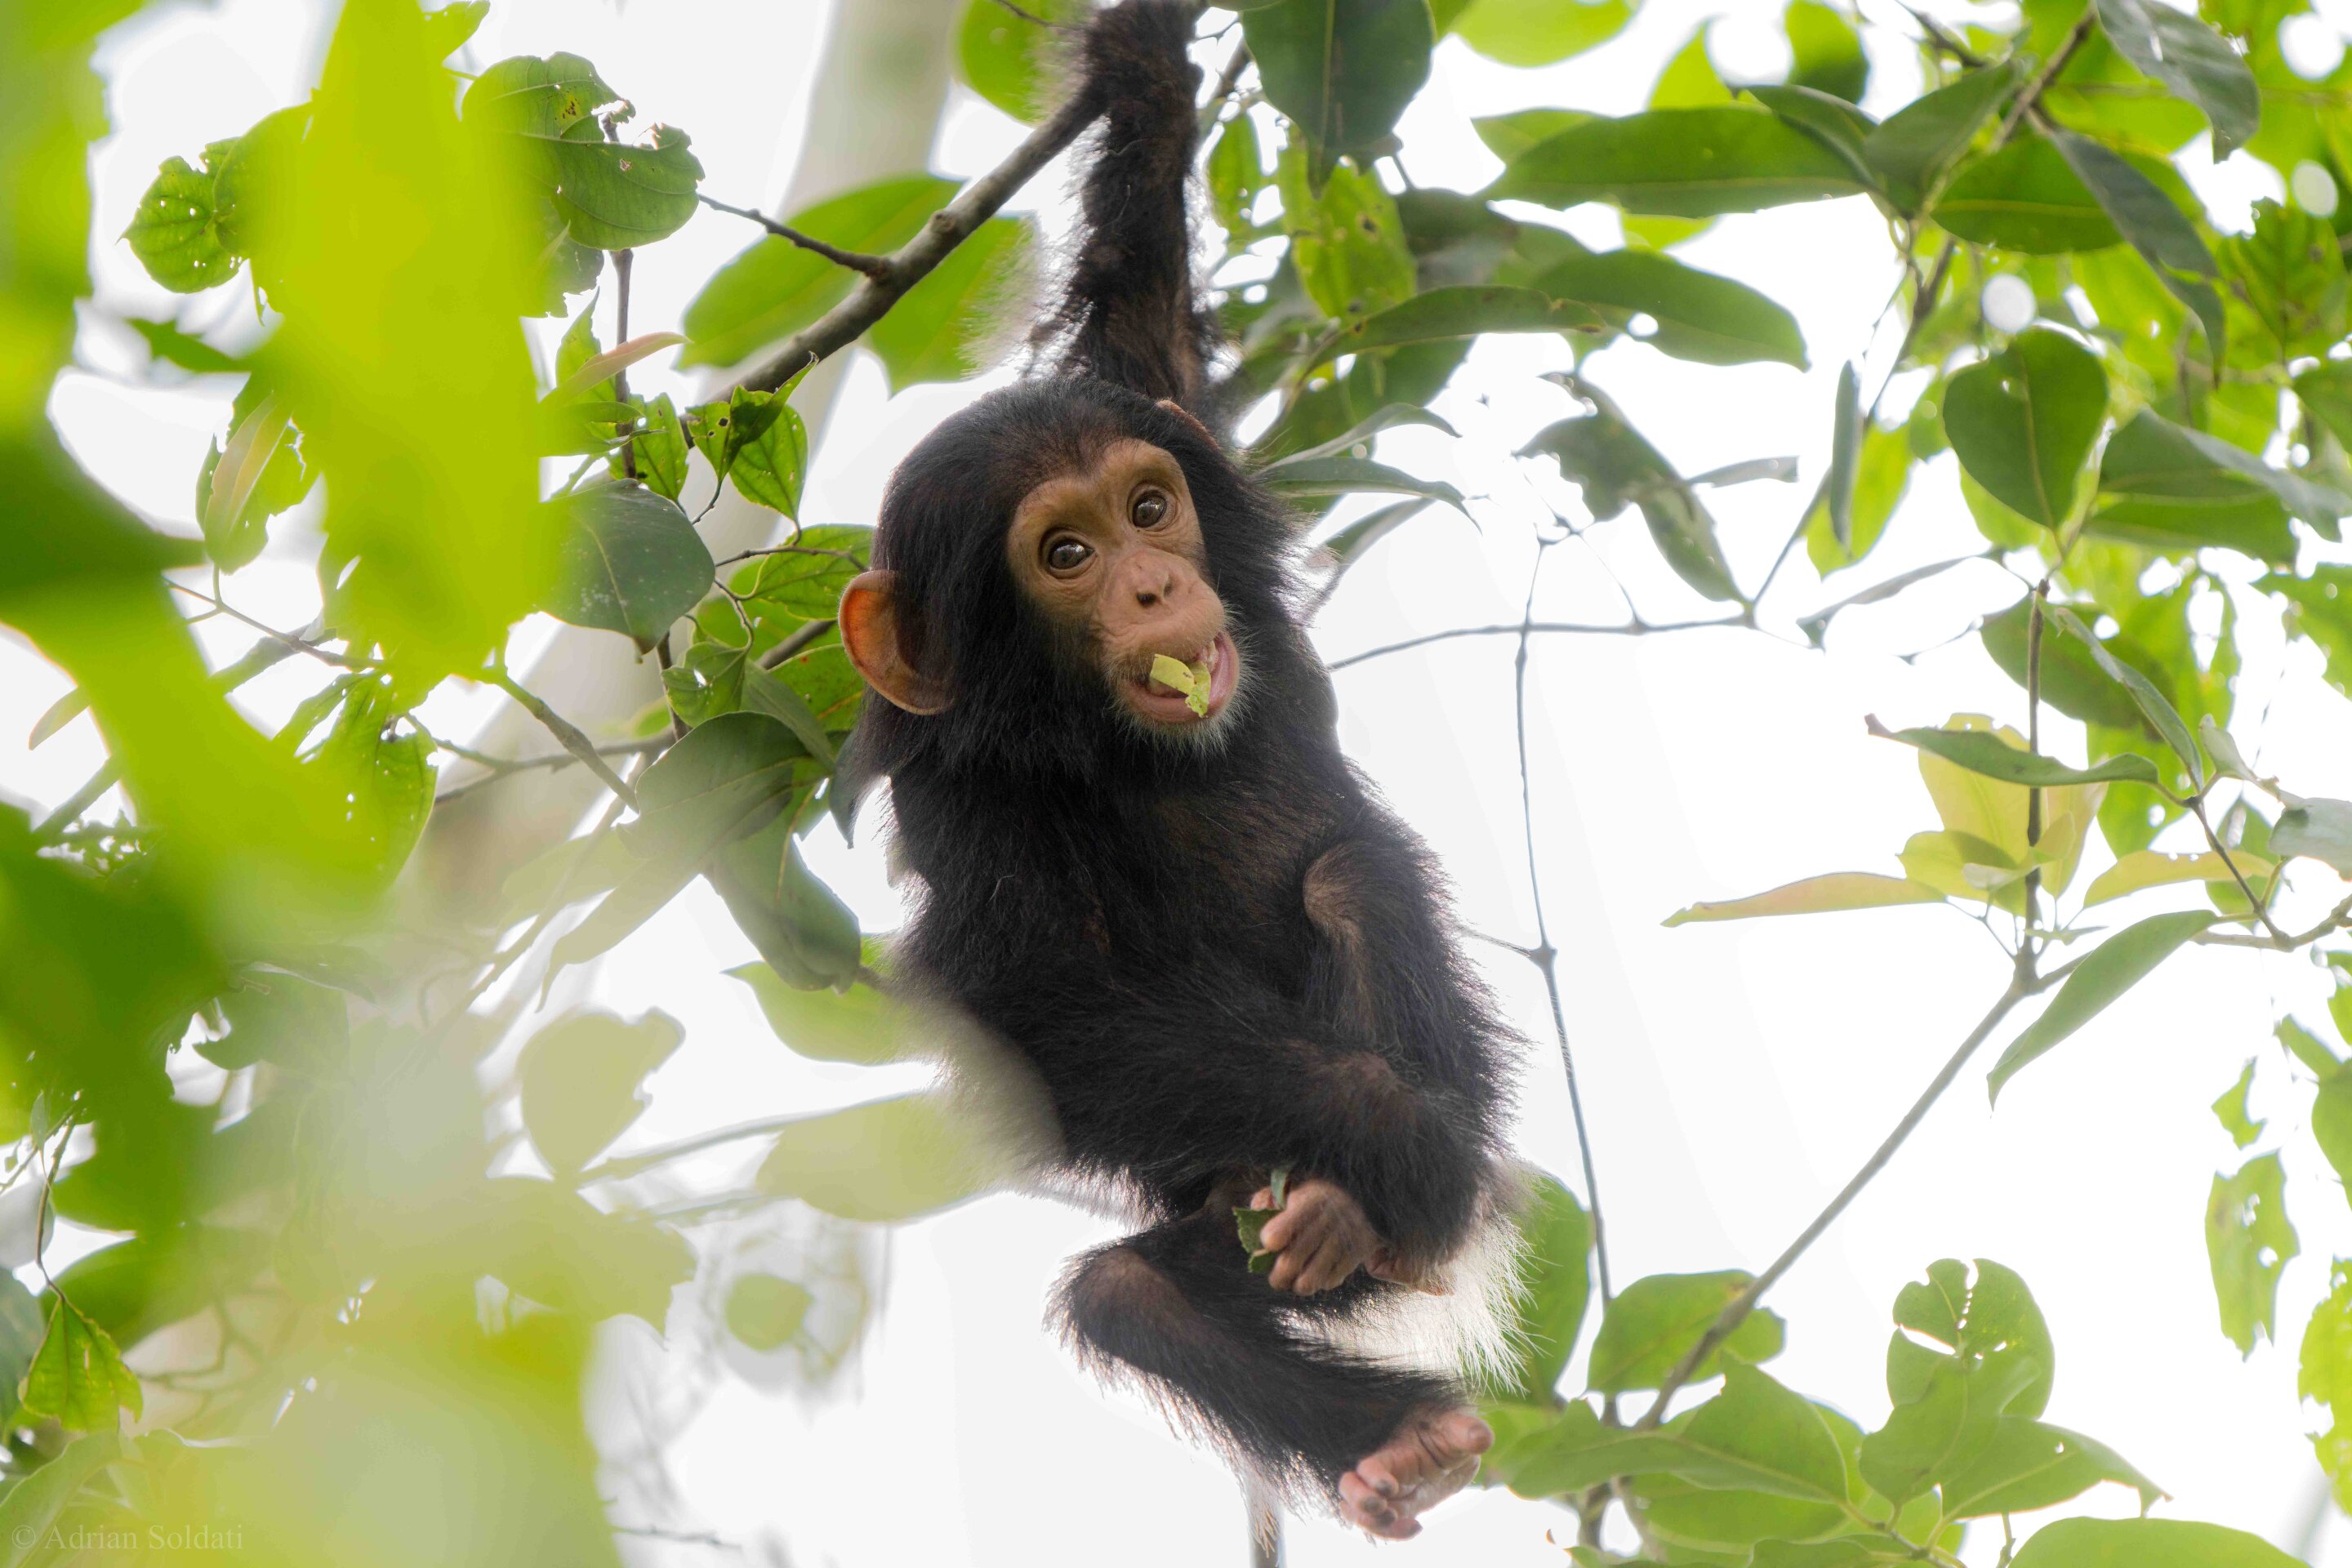 Researchers discover chimpanzee communities have local gestural dialects